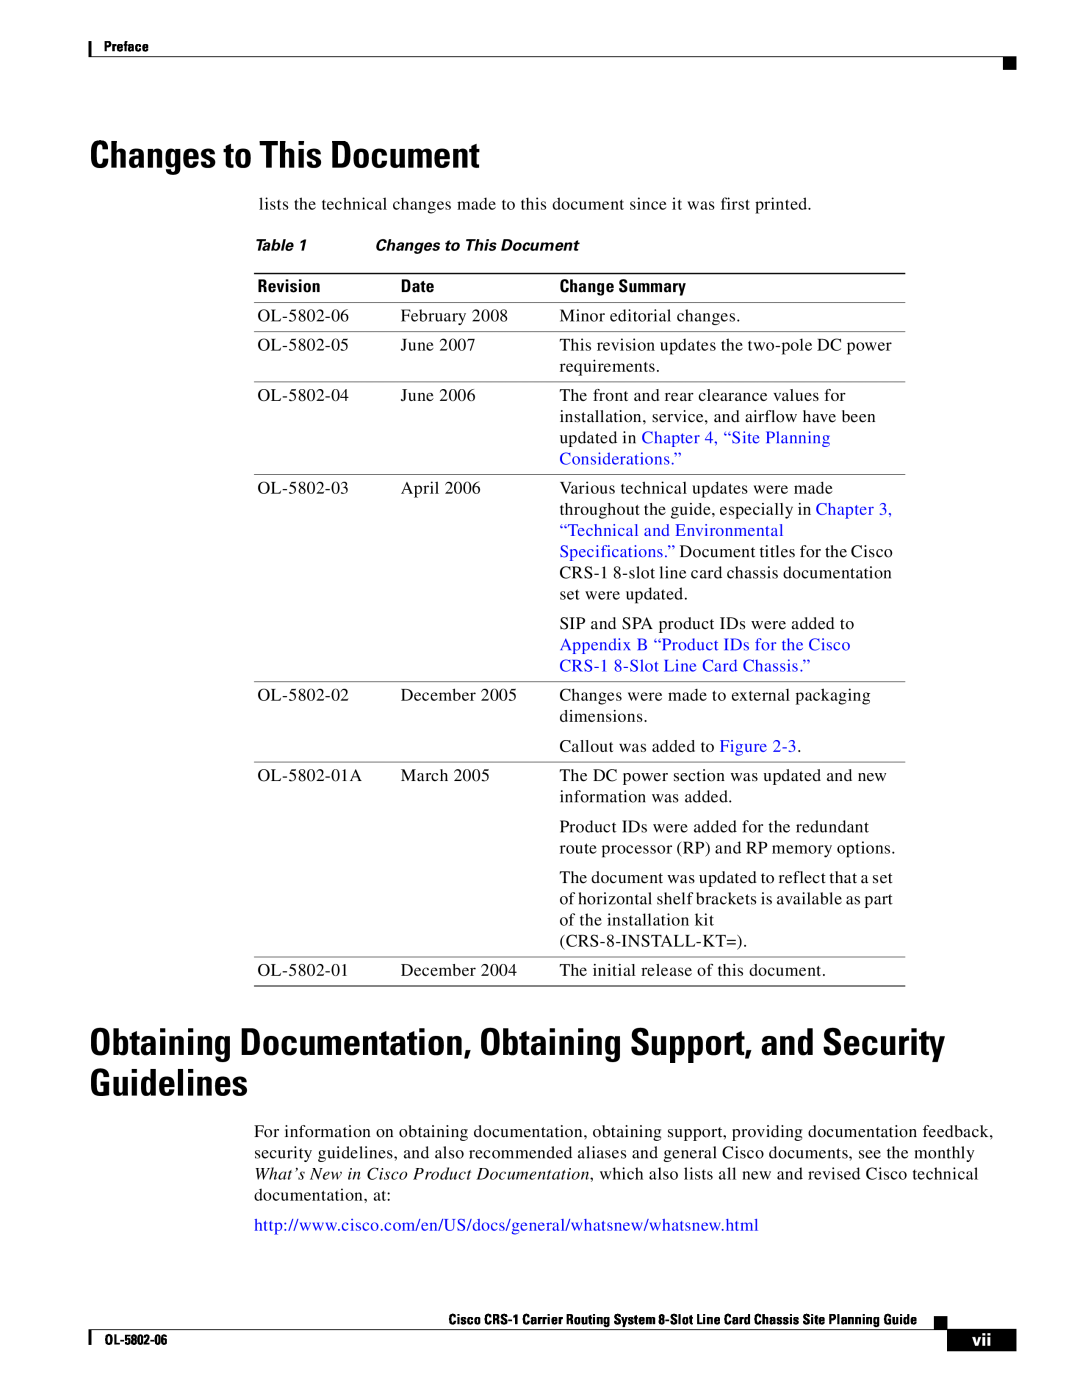 Cisco Systems CRS-1 Changes to This Document, Obtaining Documentation, Obtaining Support, and Security Guidelines, Date 